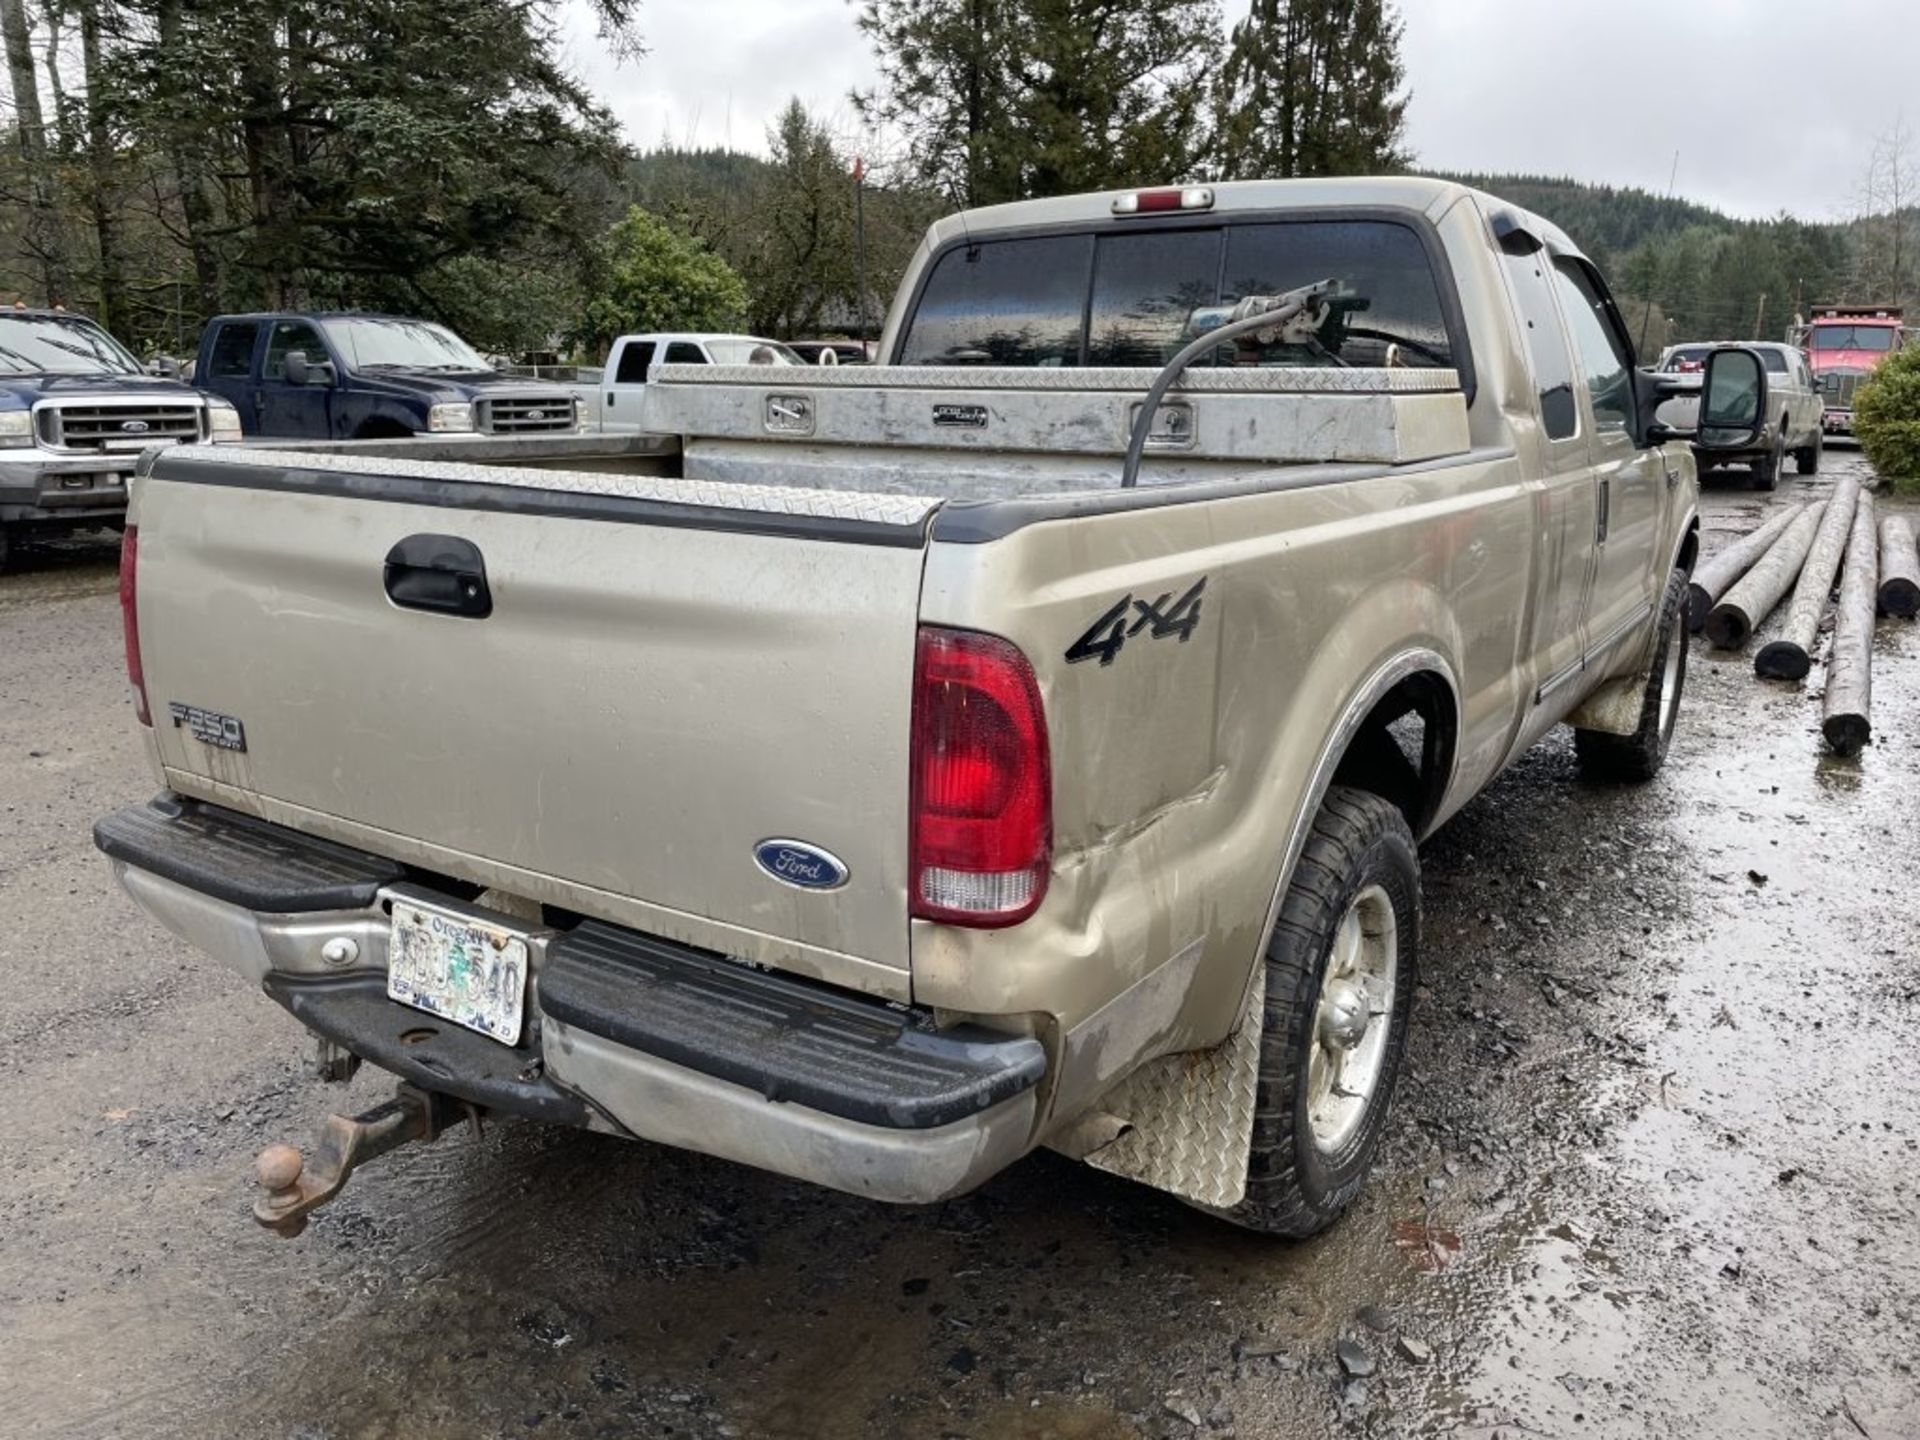 2000 Ford F250 XLT SD 4x4 Extra Cab Pickup - Image 3 of 14